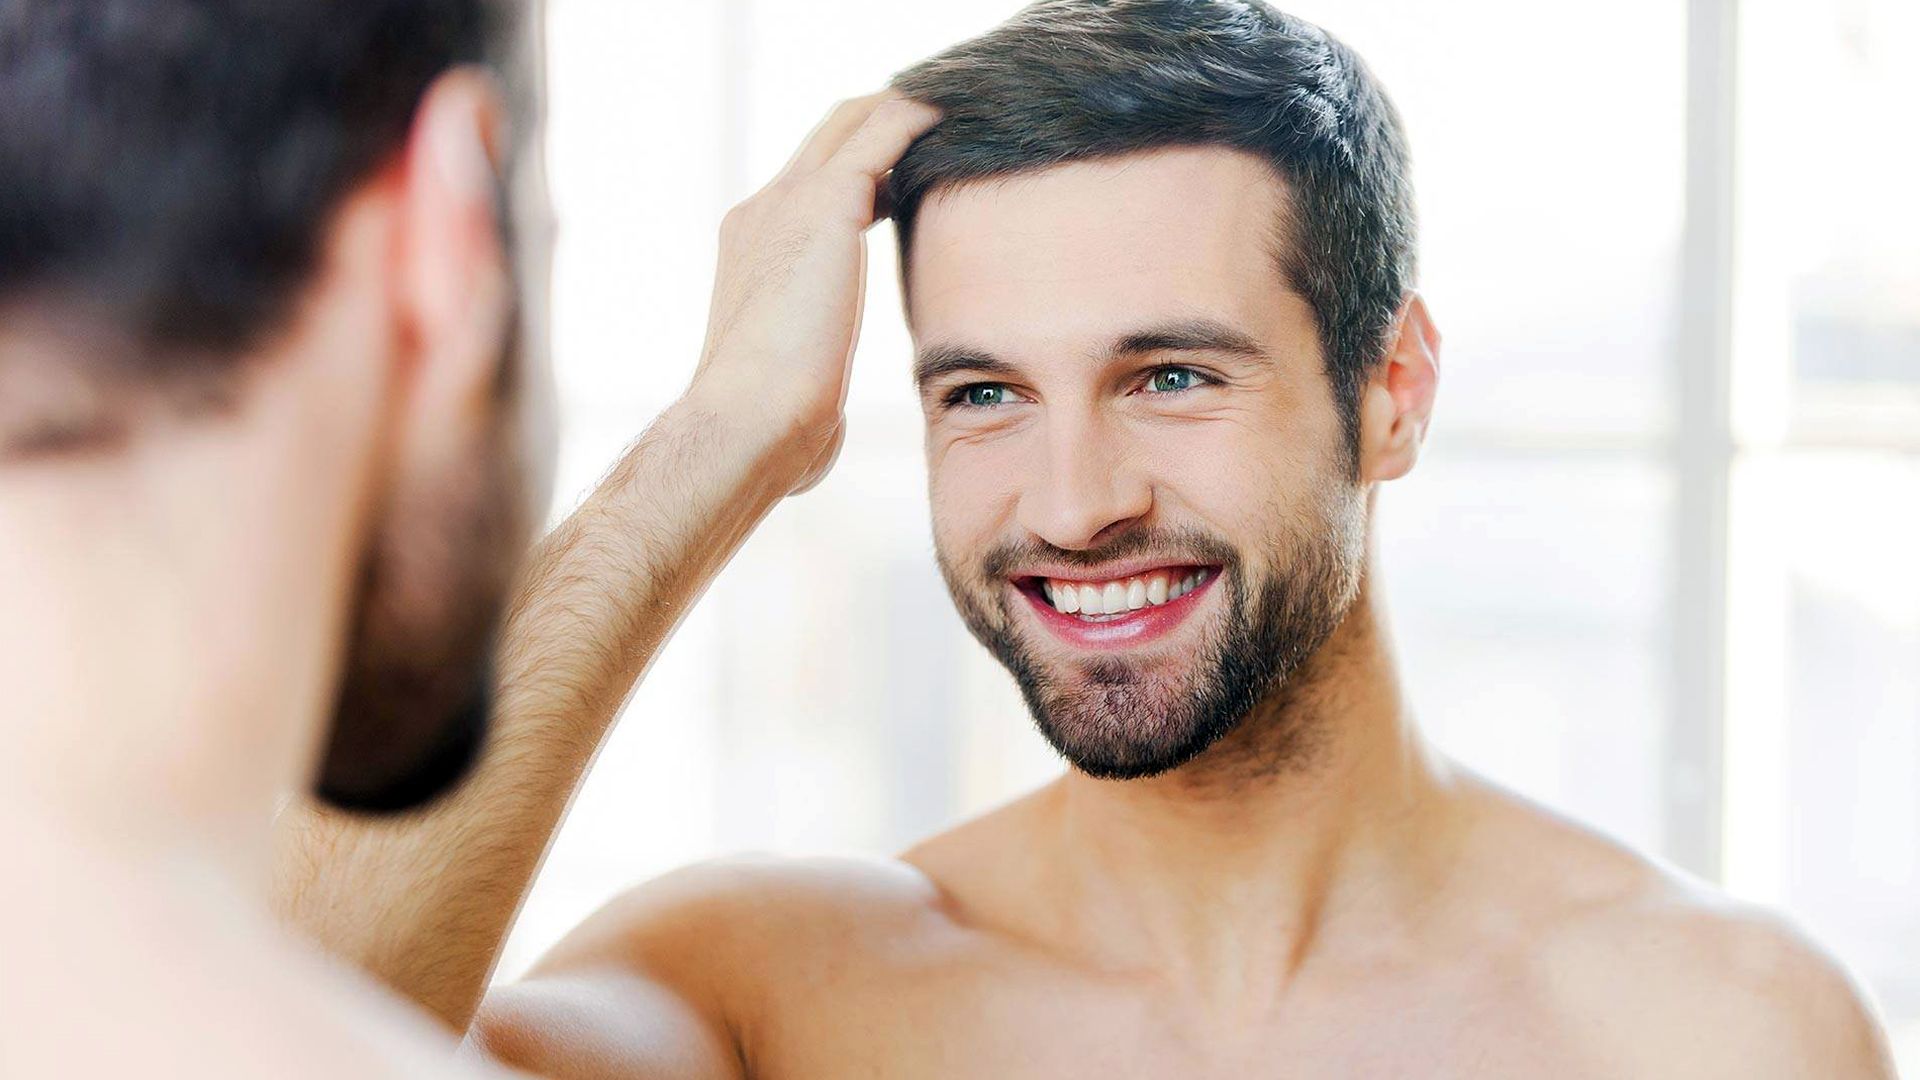 Miracle Hair Clinic: Your Solution for Hair Transplant in Turkey